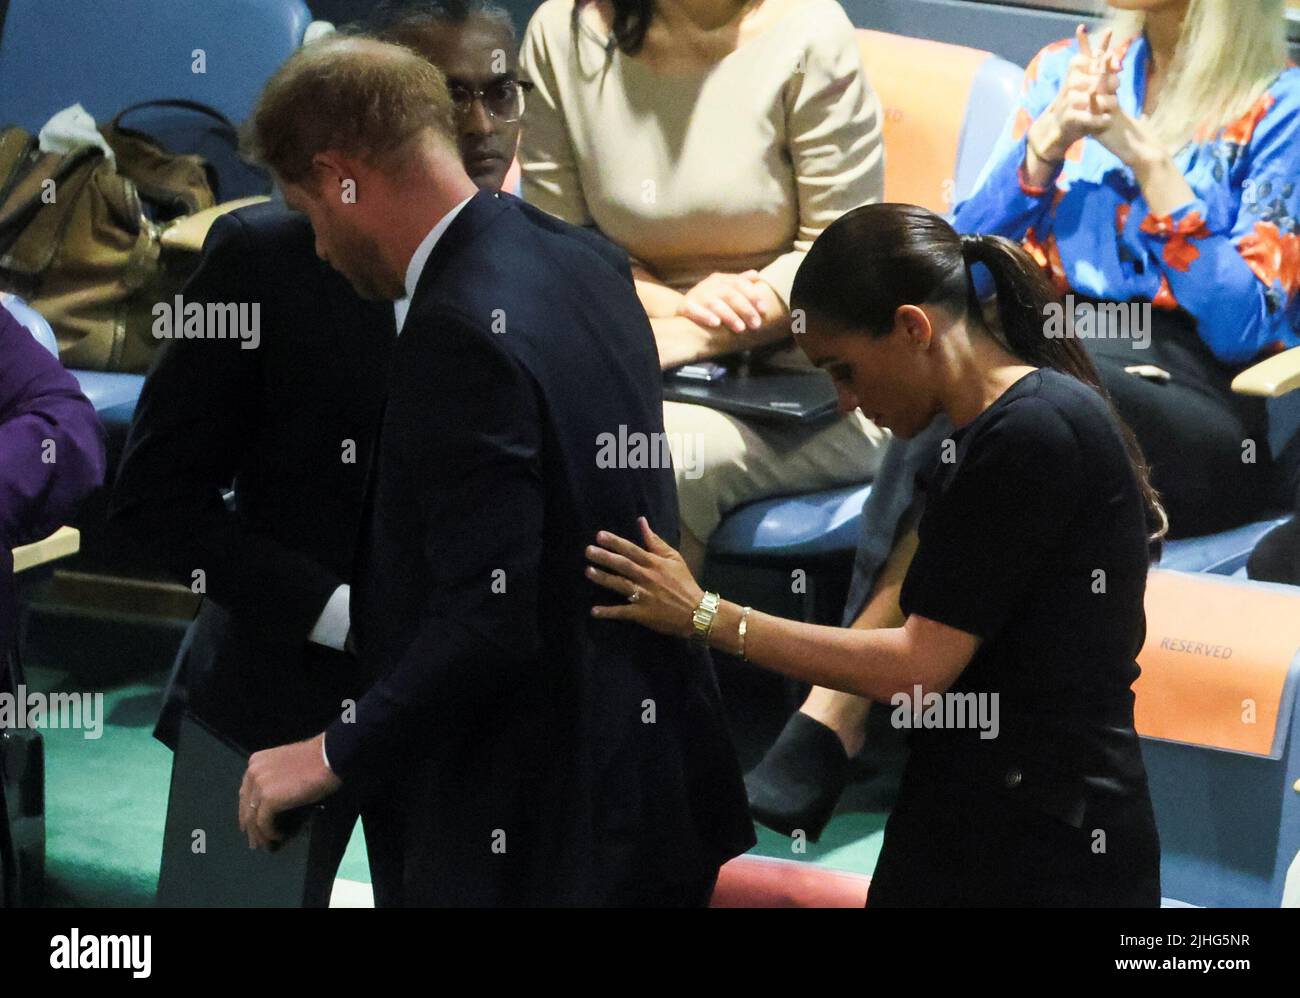 Britain's Prince Harry and his wife Meghan, Duchess of Sussex attend a celebration of Nelson Mandela International Day at the United Nations Headquarters in New York, U.S., July 18, 2022. REUTERS/Shannon Stapleton Stock Photo